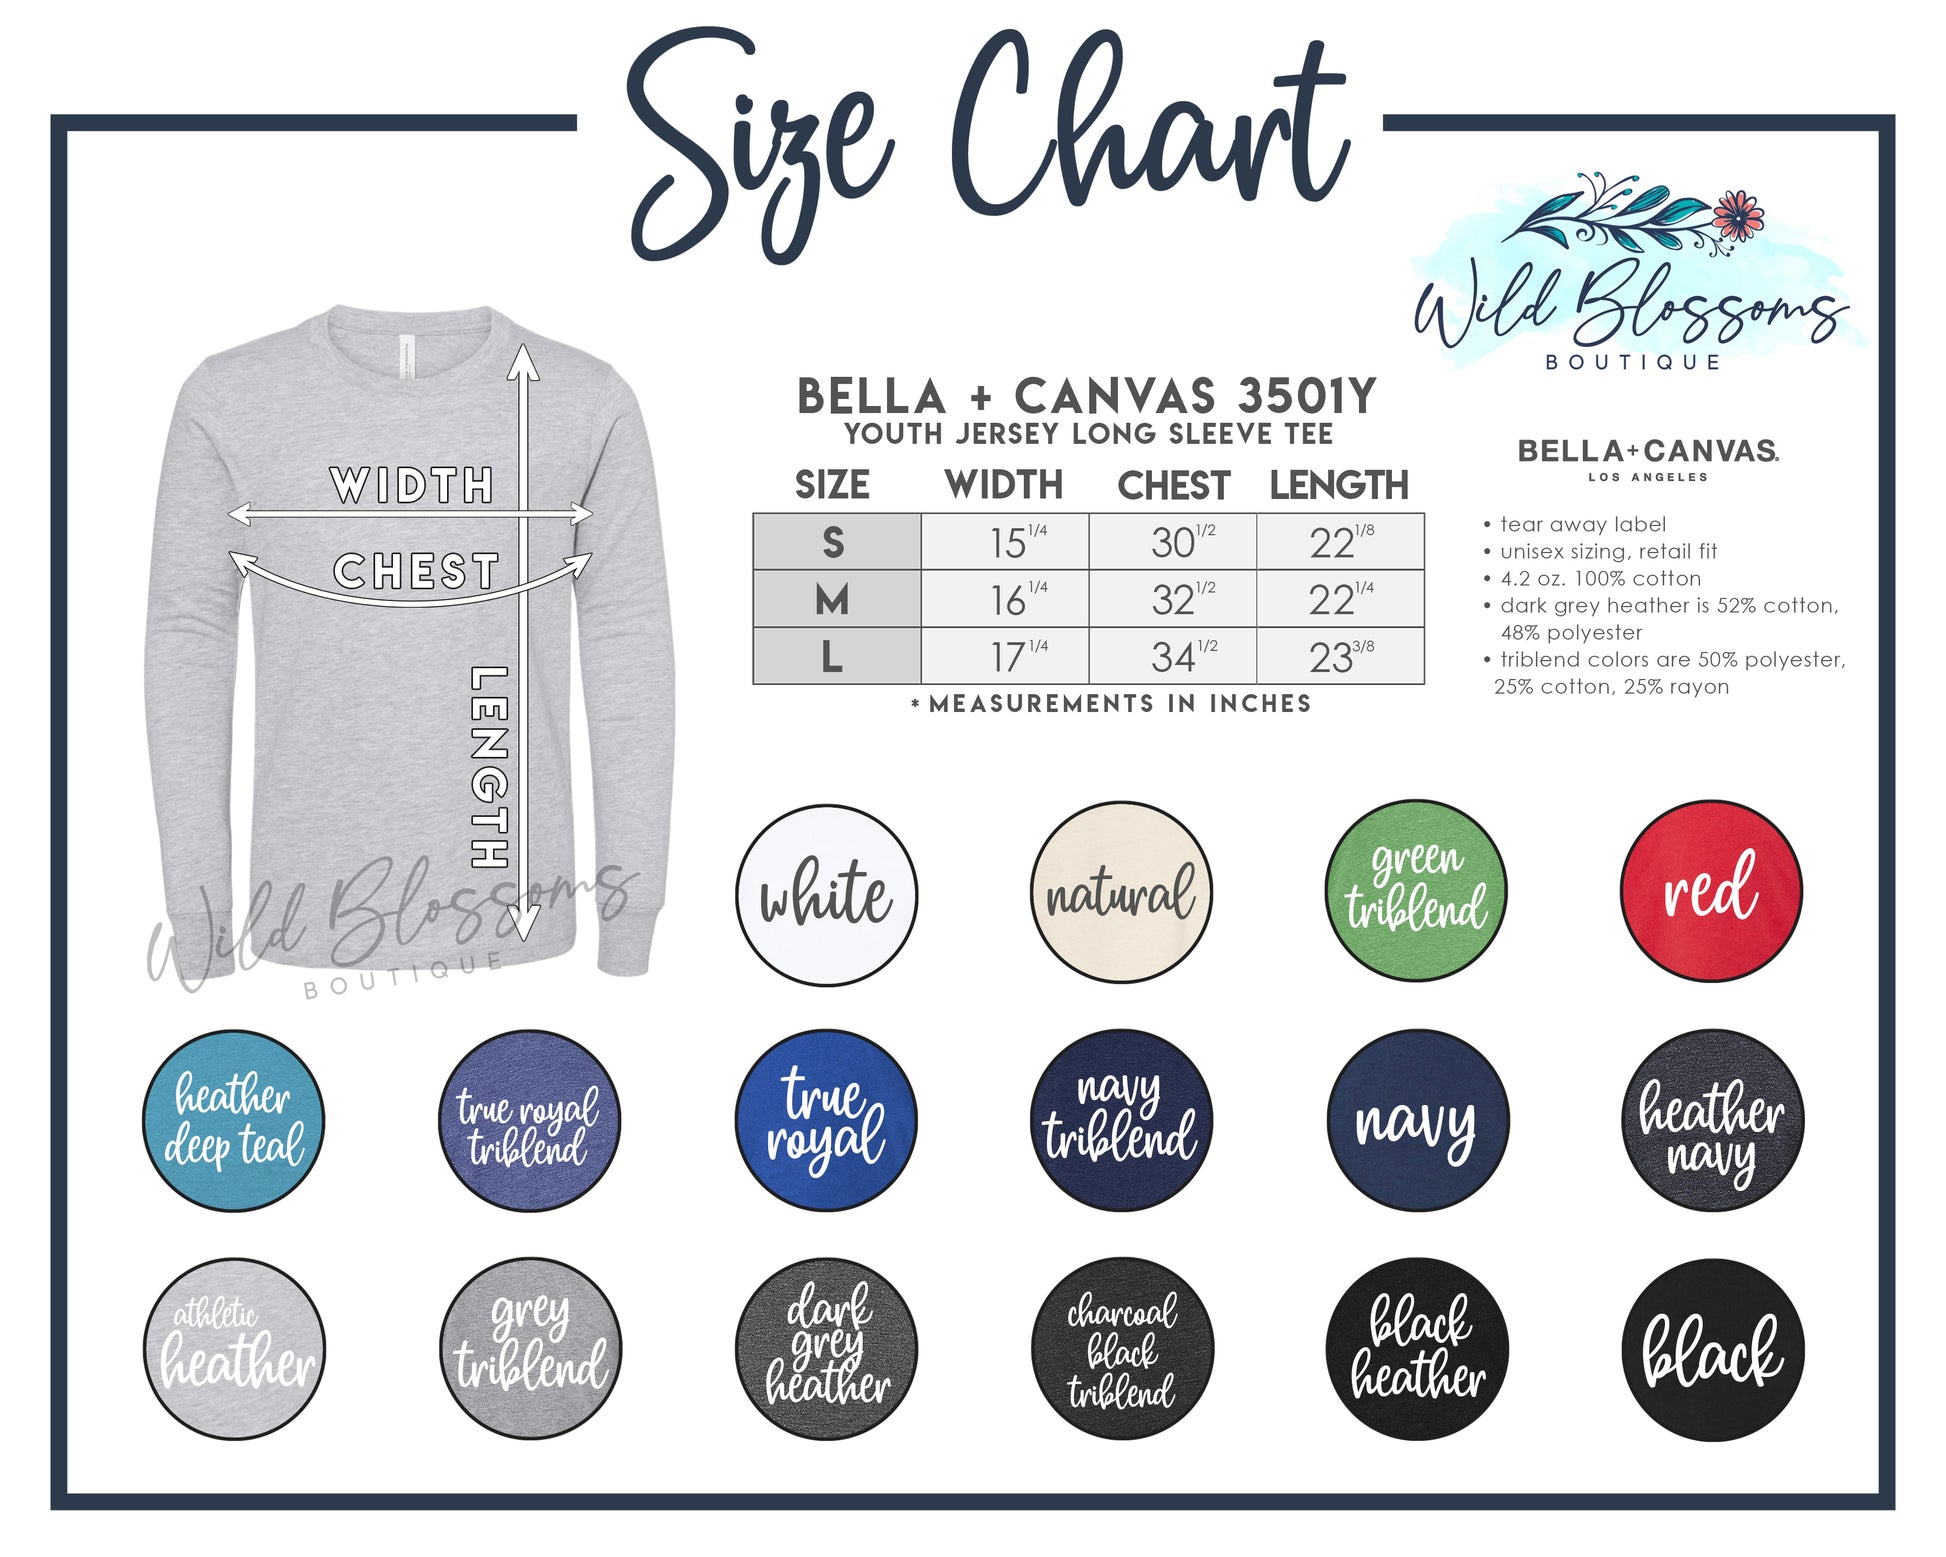 Bella + Canvas 3501 Youth Jersey Long Sleeve Tee